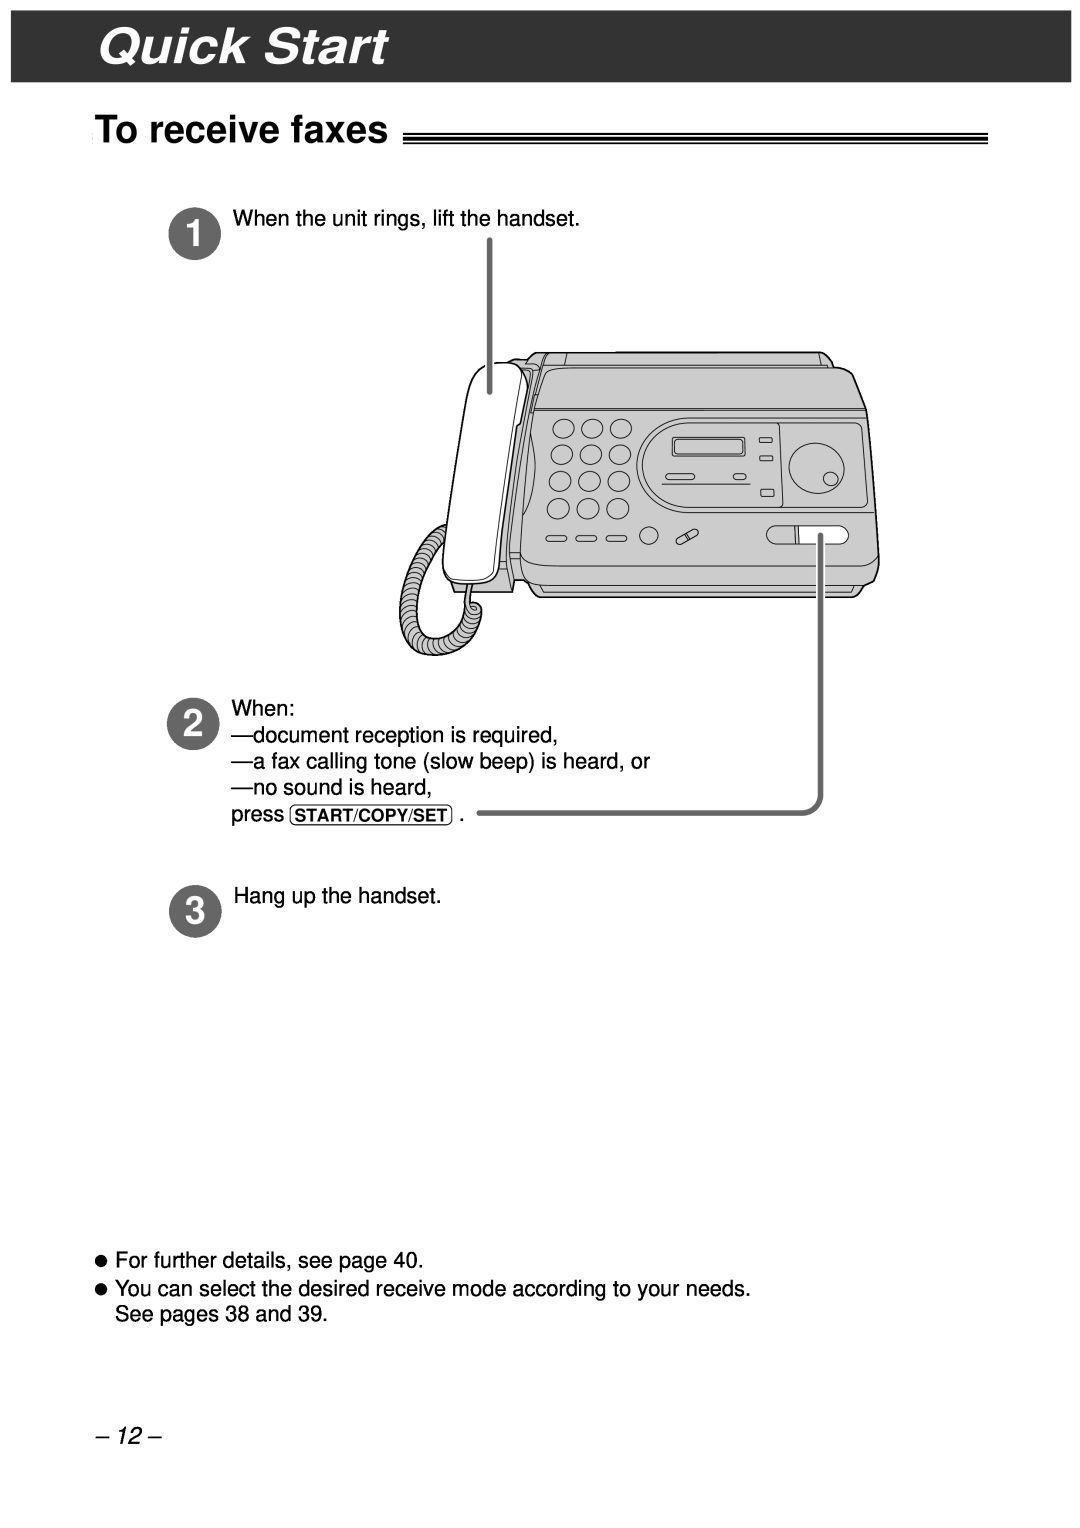 Panasonic KX-FT33HK To receive faxes, When the unit rings, lift the handset When, document reception is required 